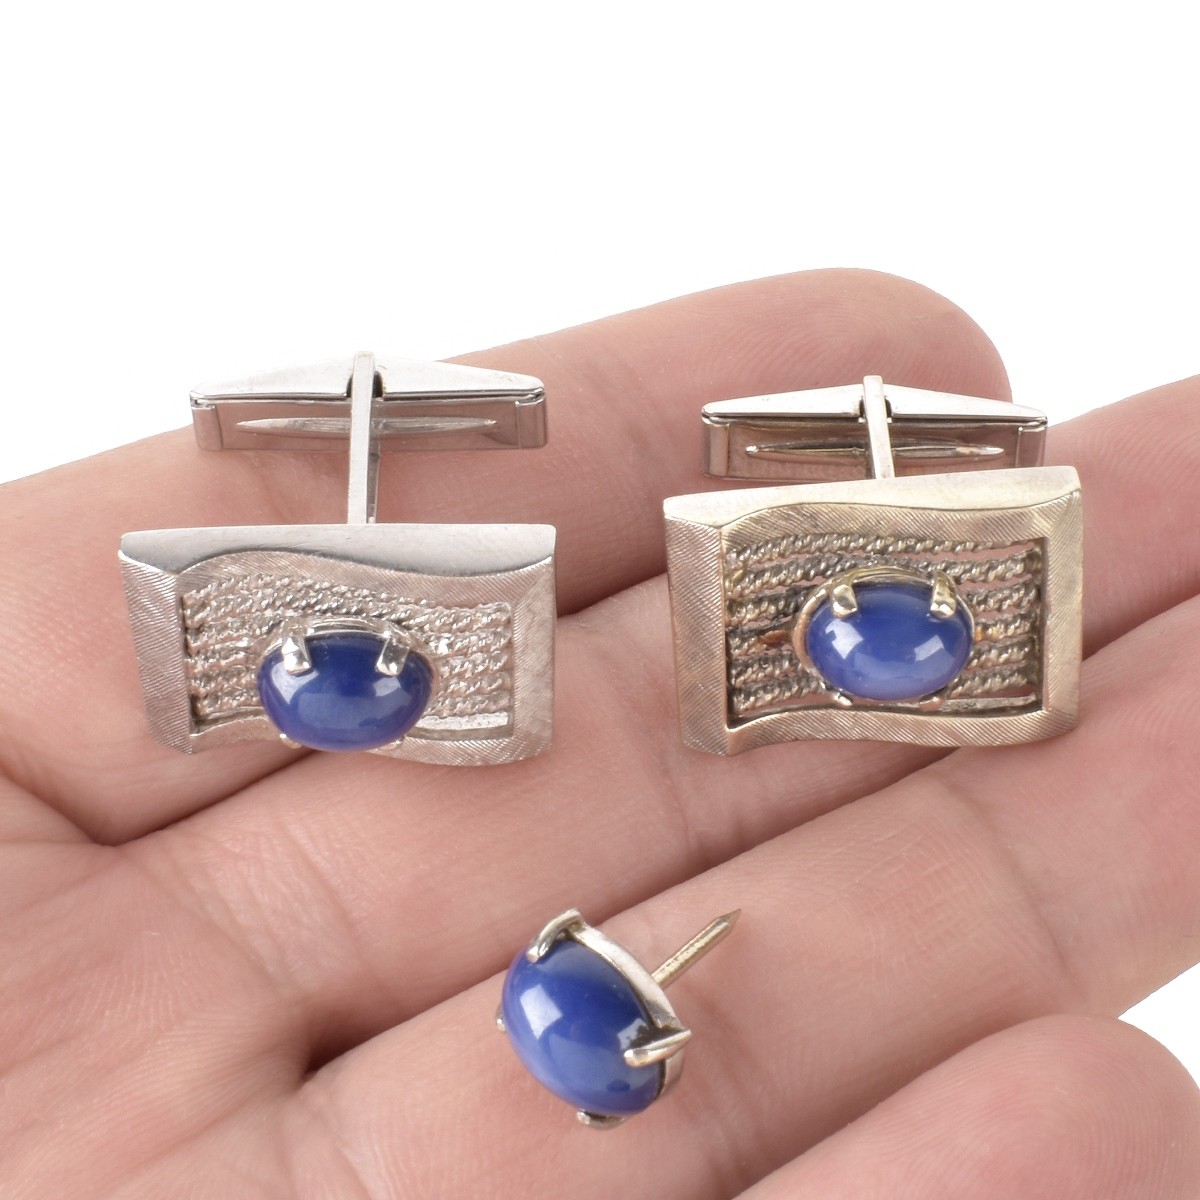 Star Sapphire and 14K Cufflinks and Tie Tack